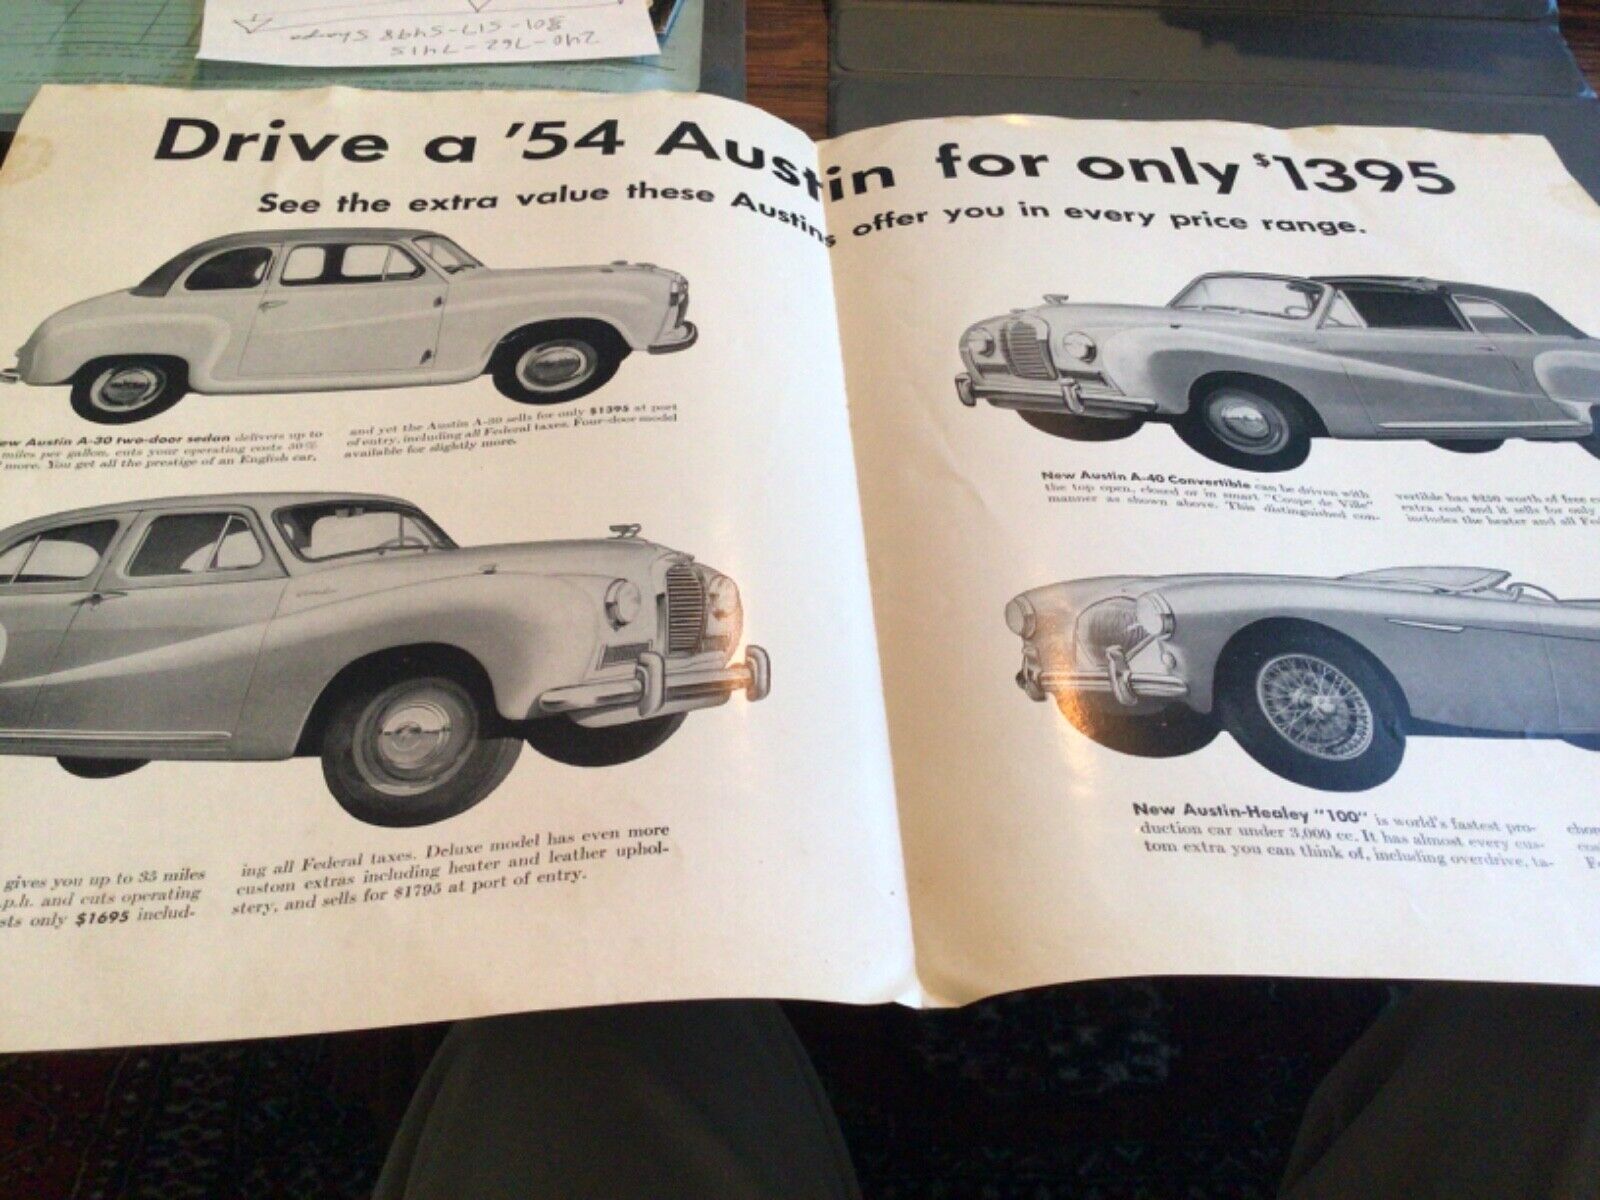 Drive a ‘54 Austin for only $1395, Pictorial British Flyer